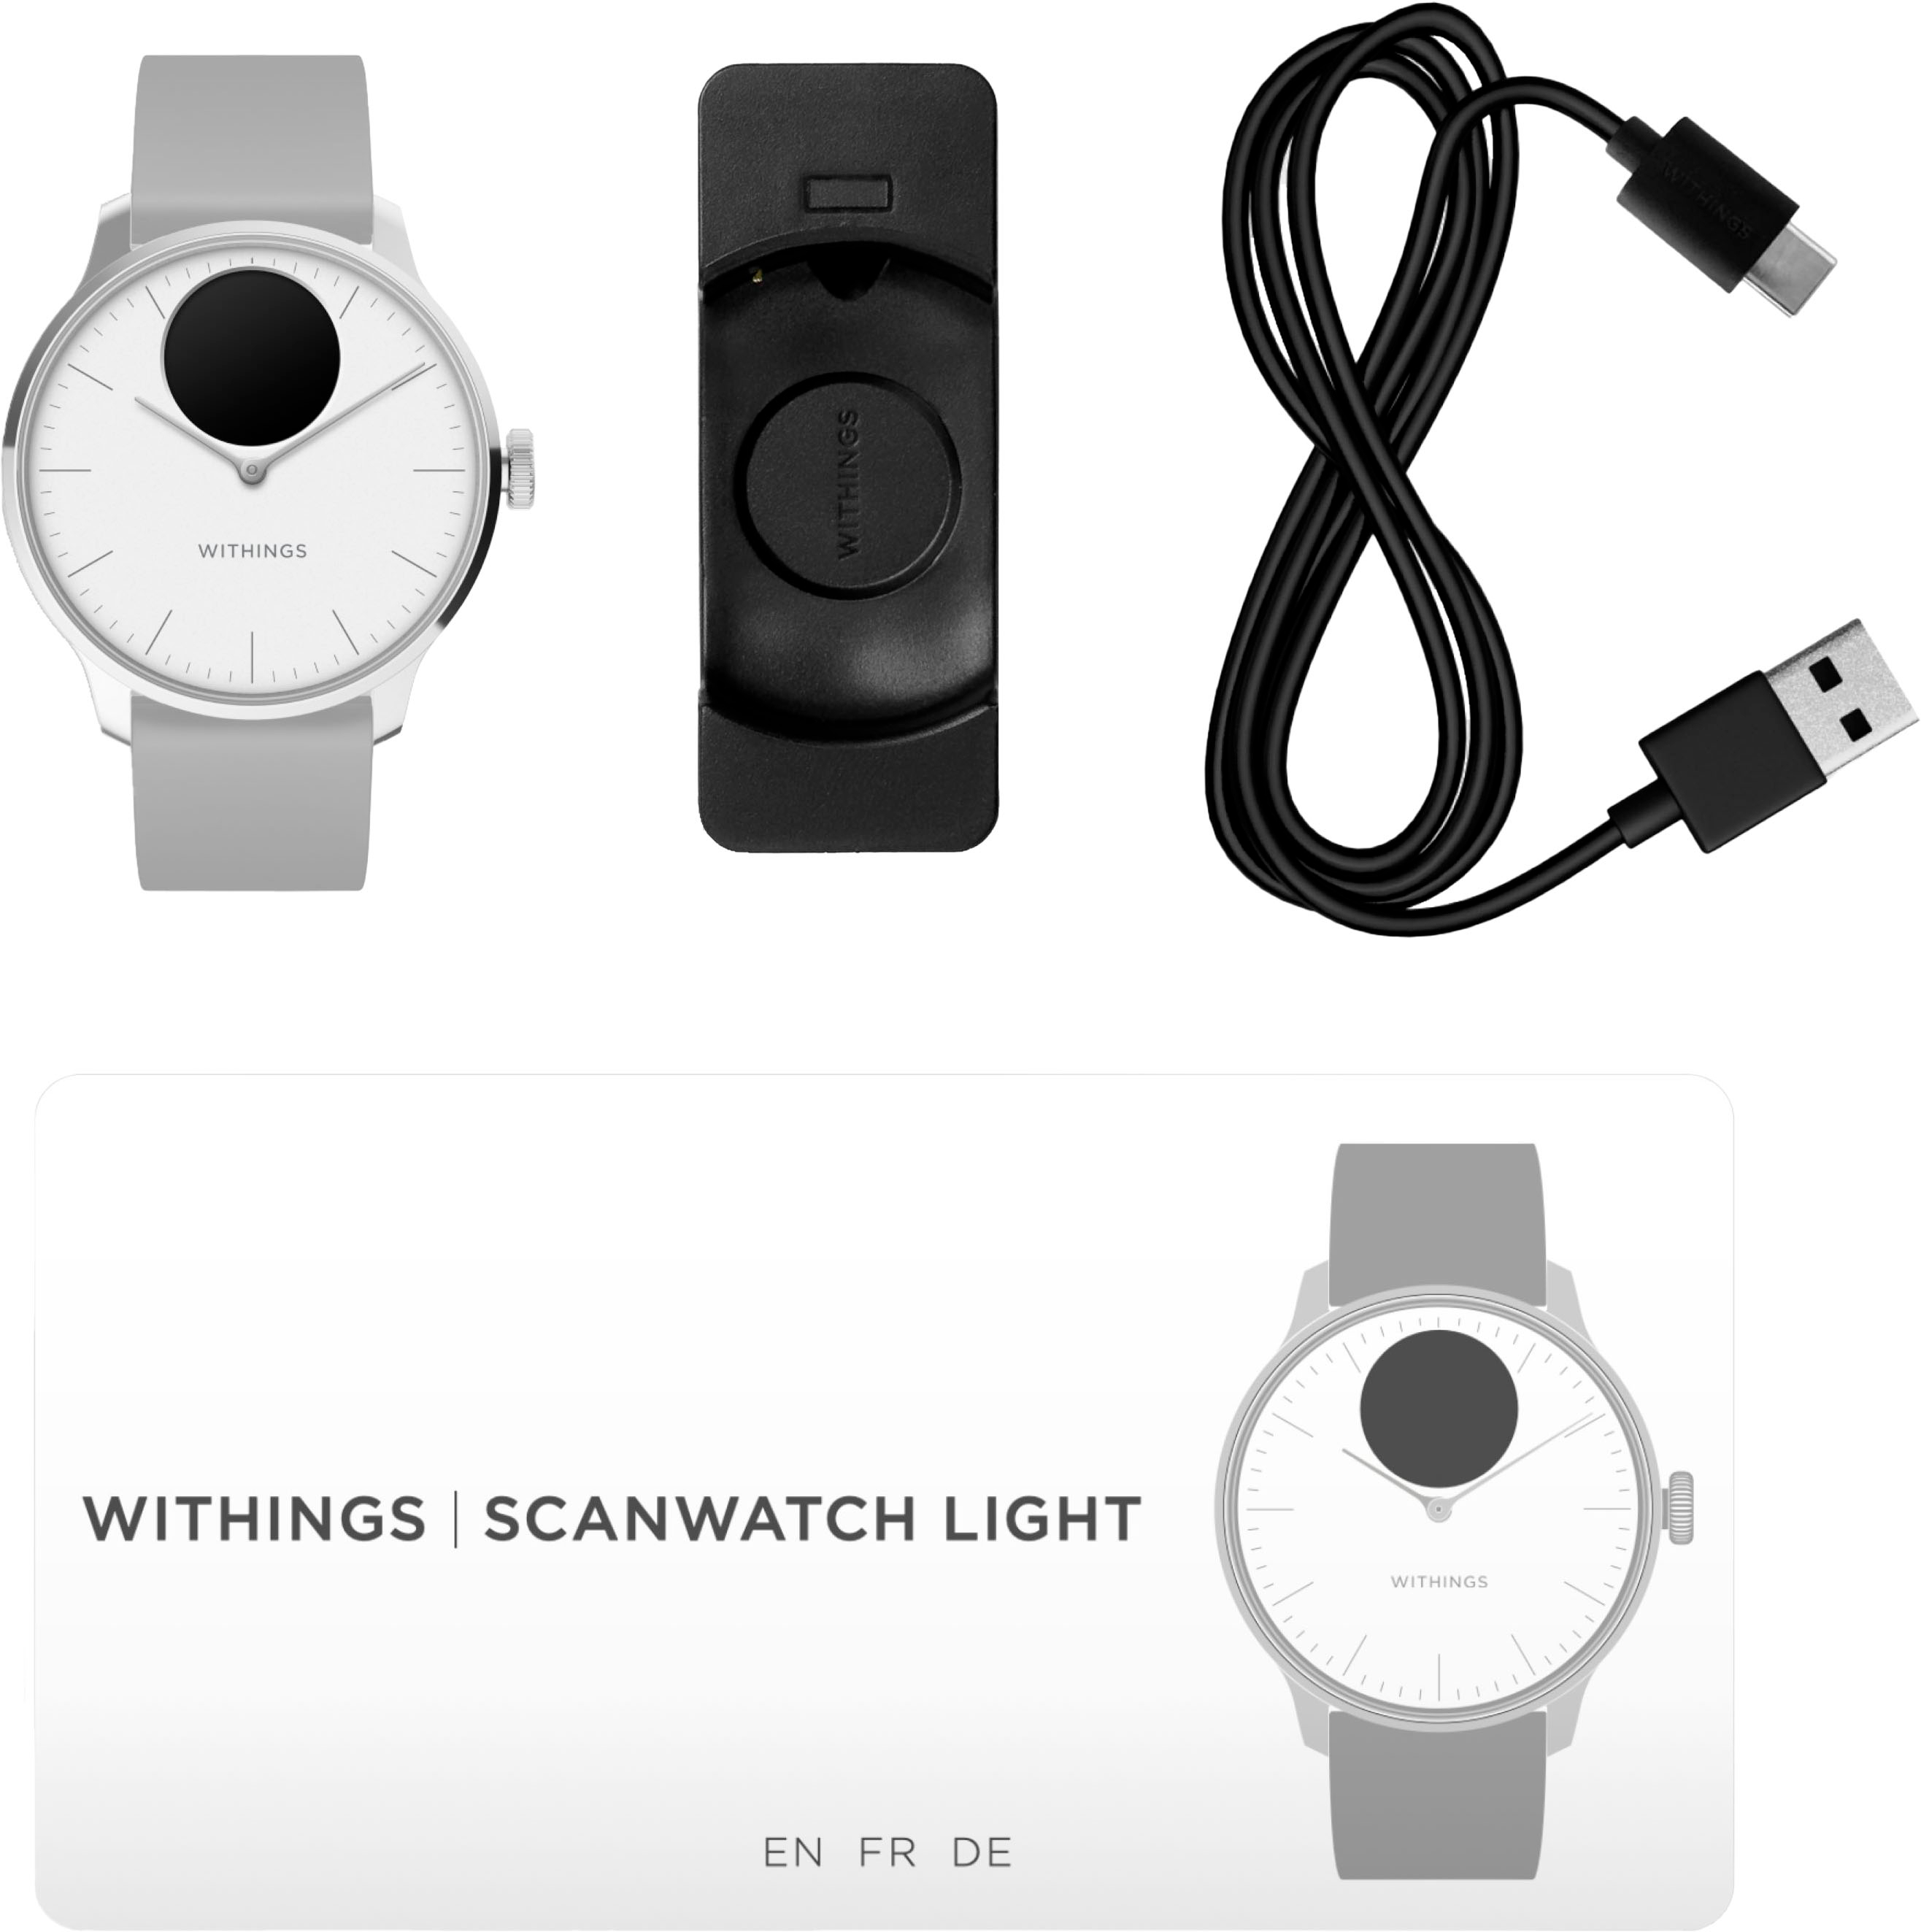 Withings ScanWatch 2: A Stylish Timepiece With Top-notch Health